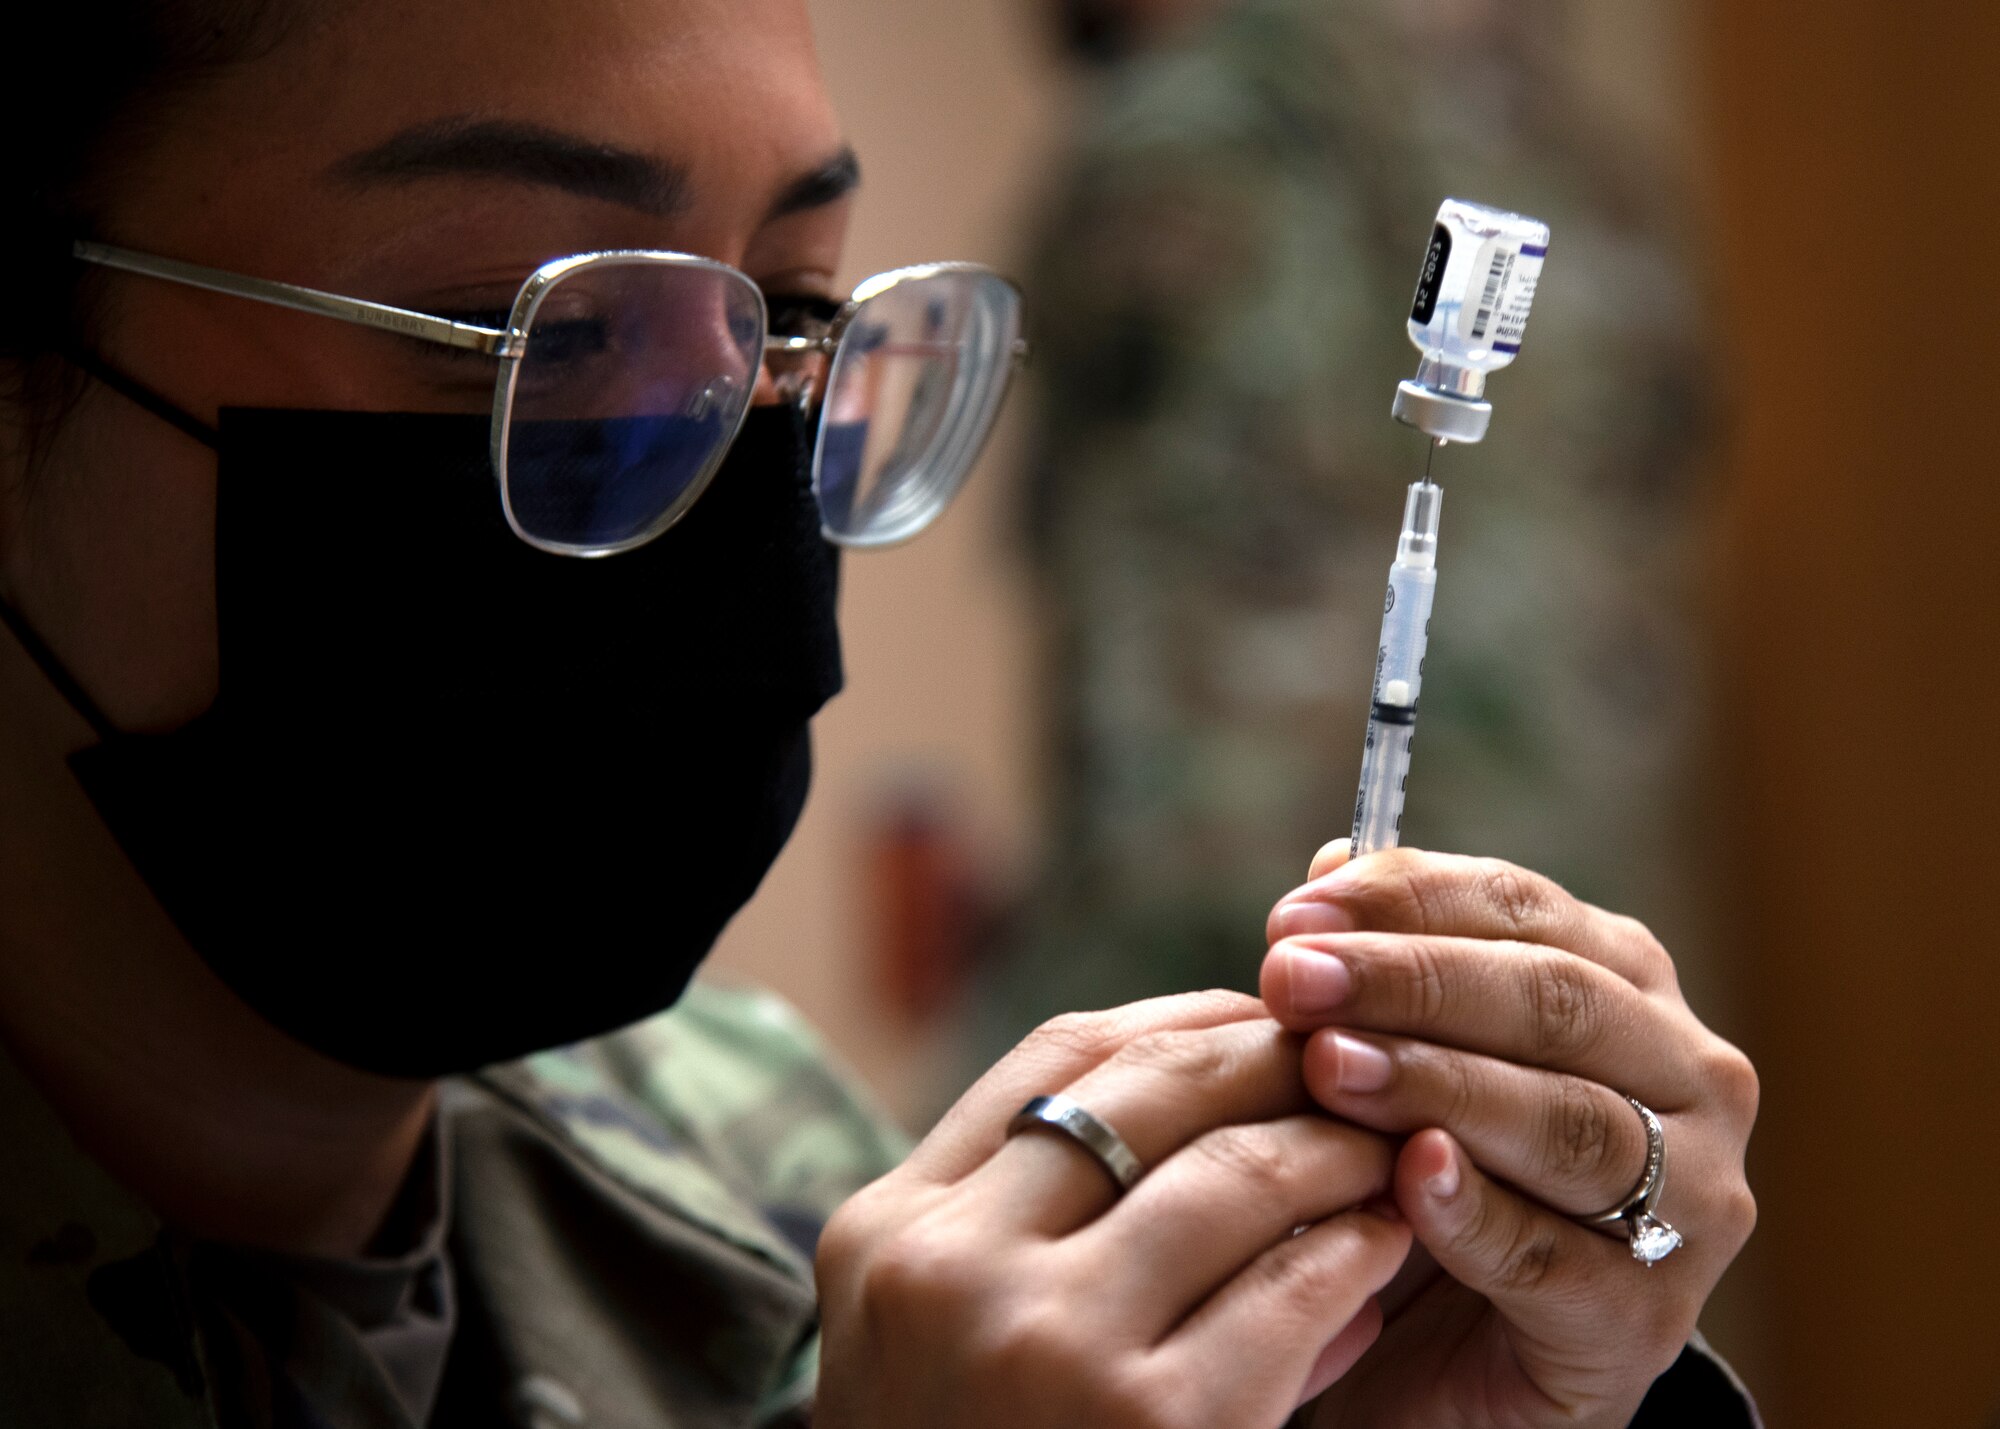 Senior Airman Sara Sanchez from the 6th Health Care Operations Squadron prepares a COVID-19 vaccine for distribution at MacDill Air Force Base, Florida, Sept. 30, 2021.